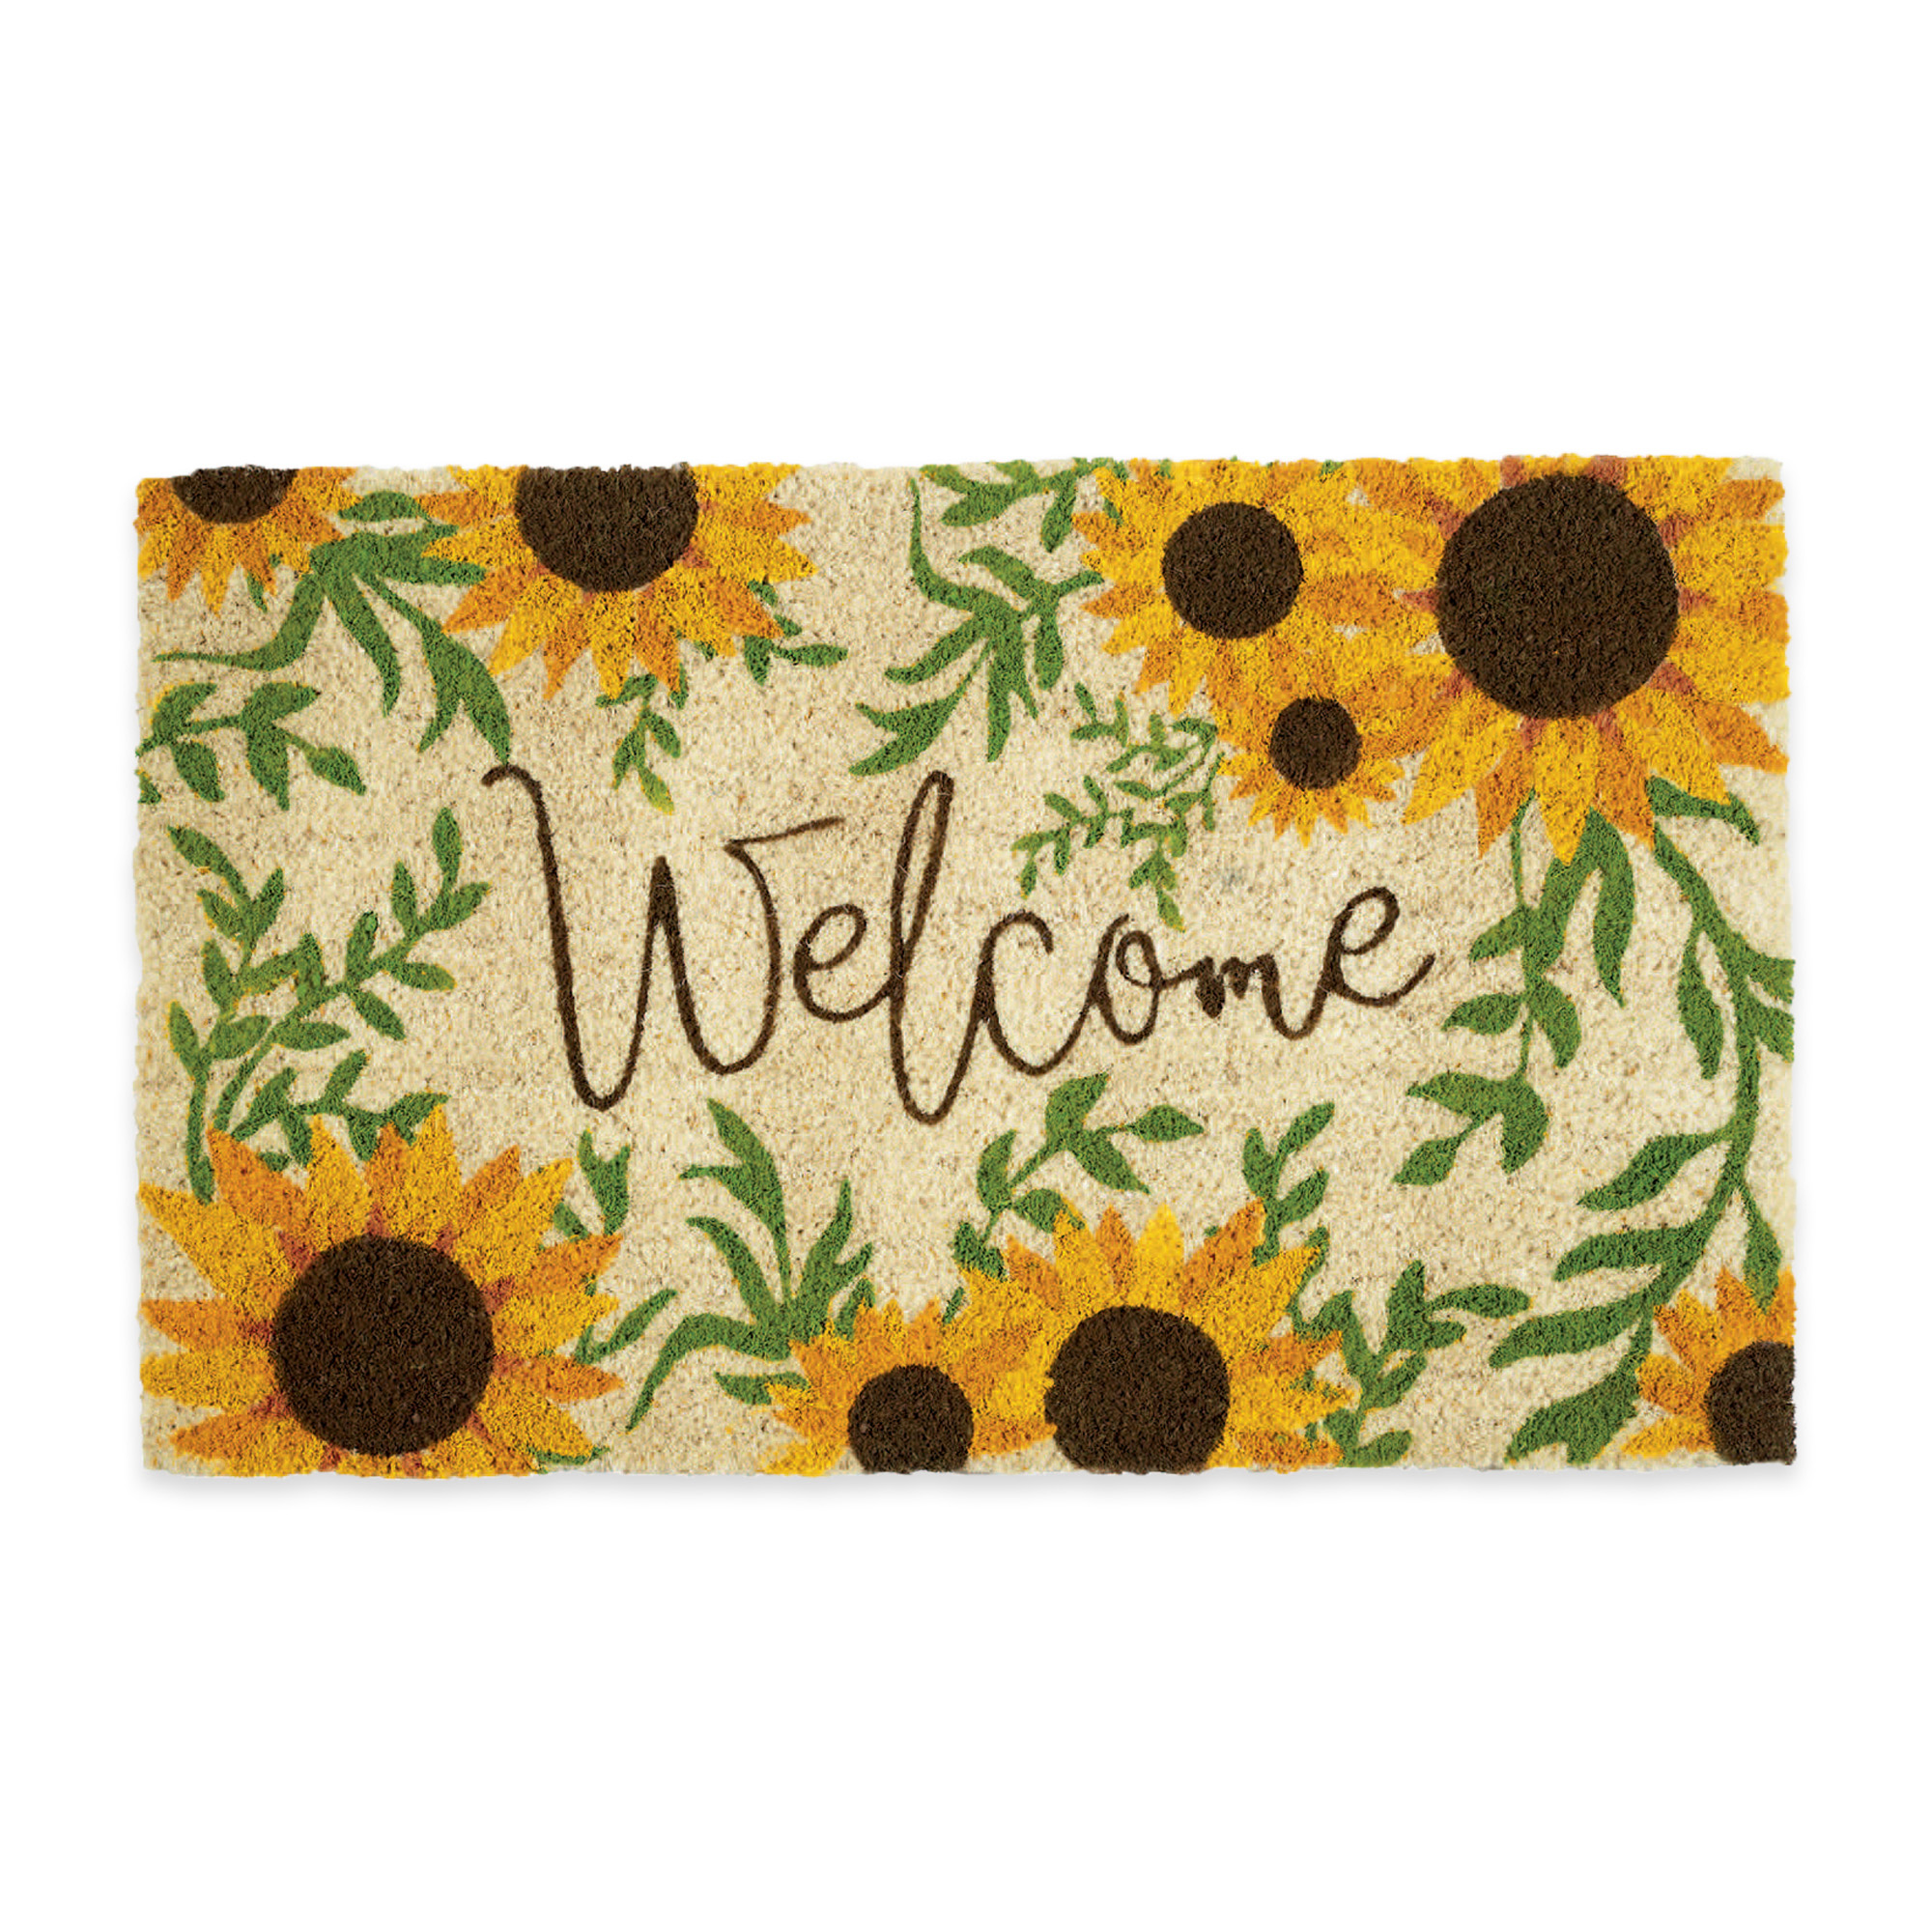 Contemporary Home Living 30" Durable and Non-Slip Doormat with "Sunflower Welcome" Design